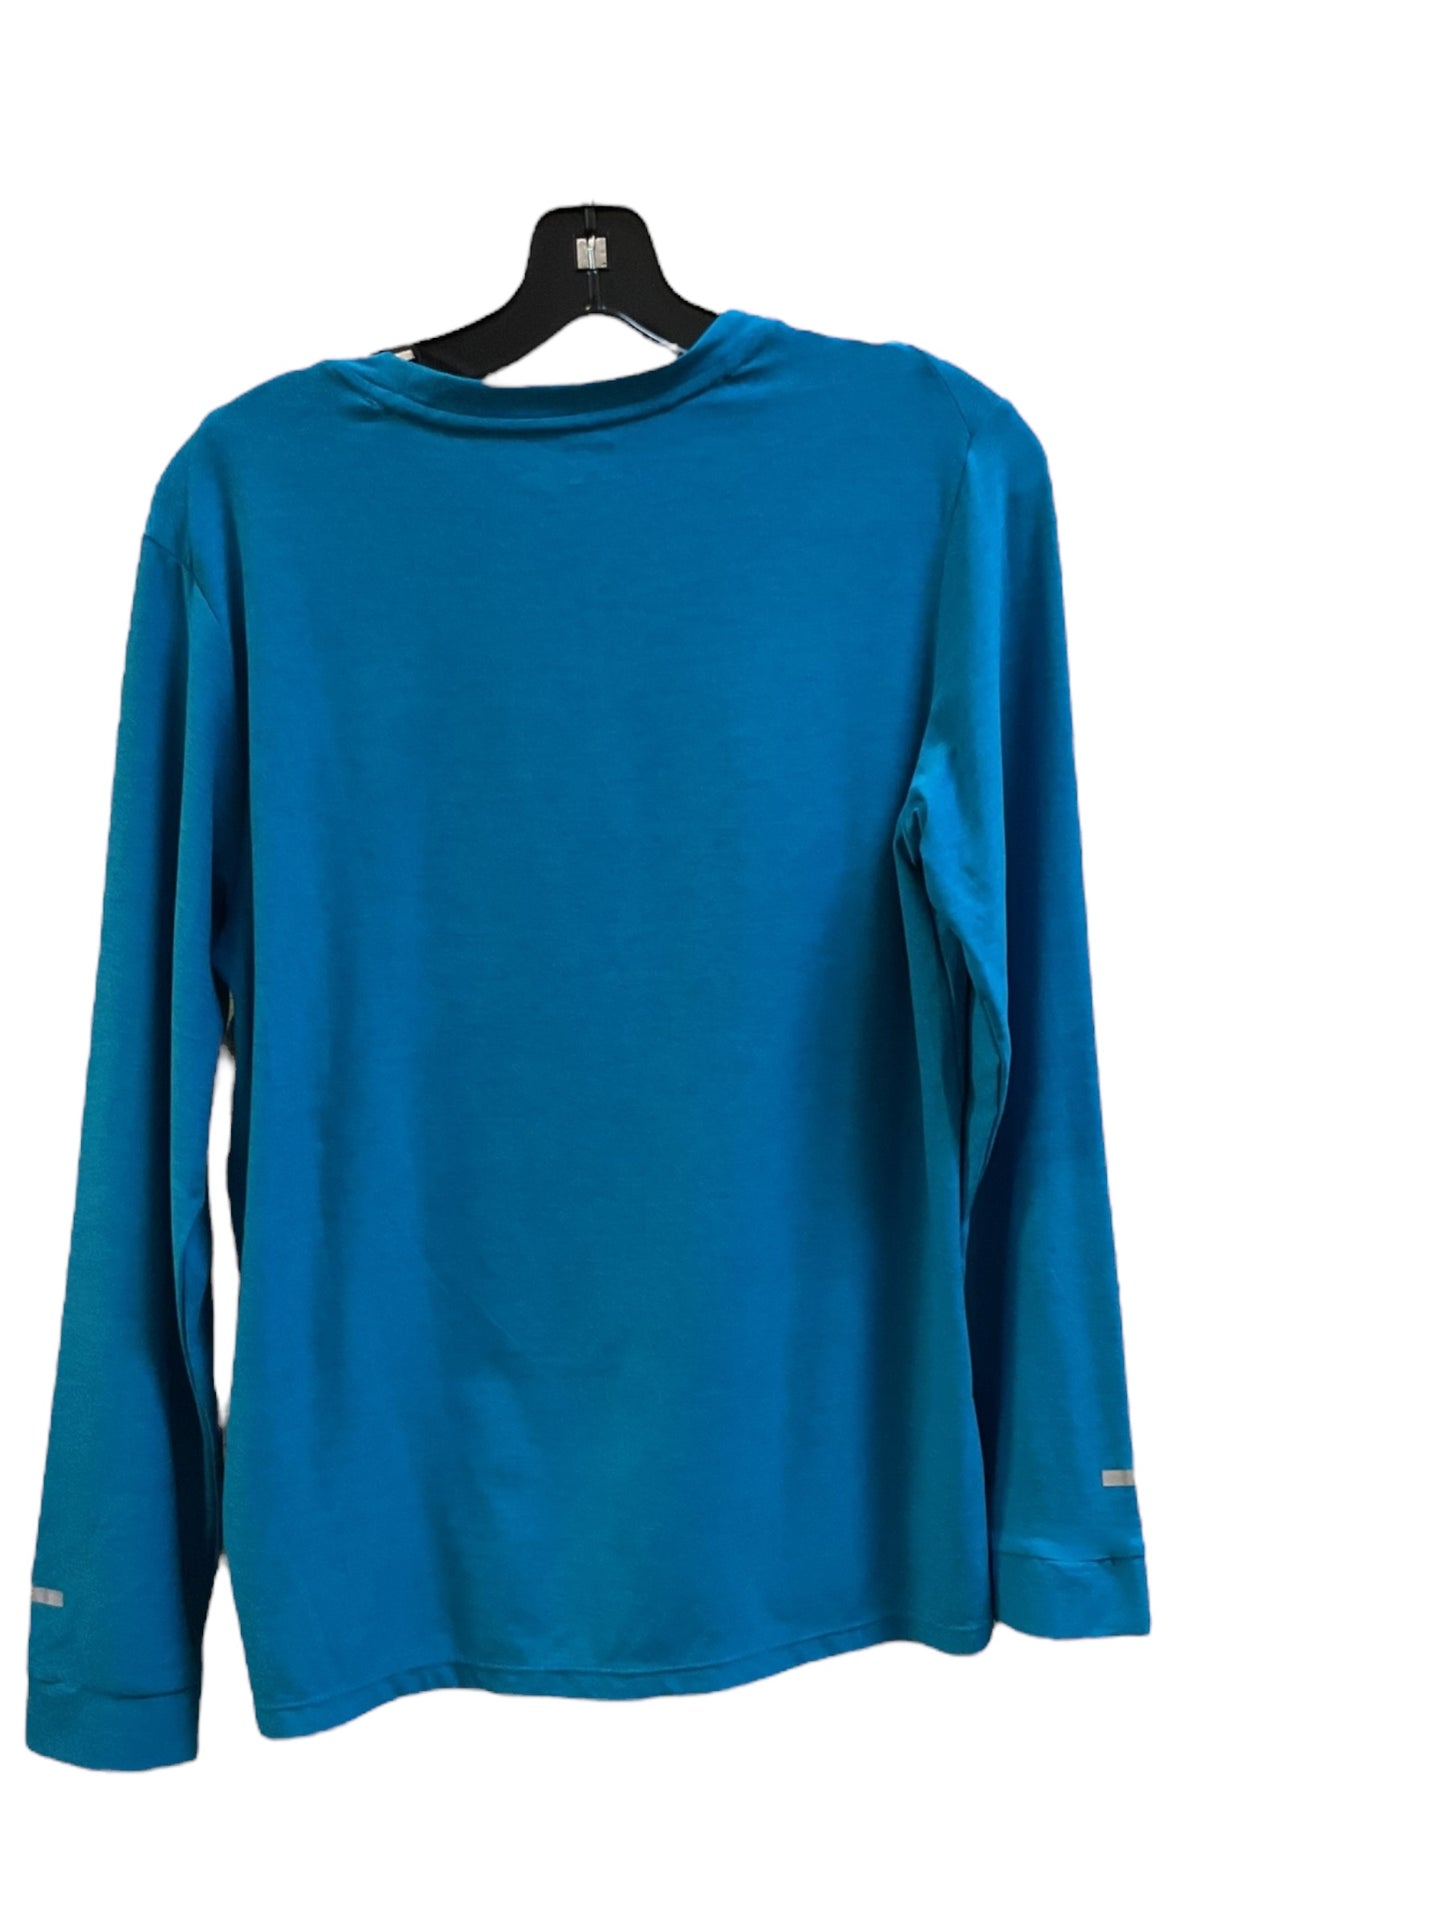 Athletic Top Long Sleeve Crewneck By Russel Athletic  Size: 1x